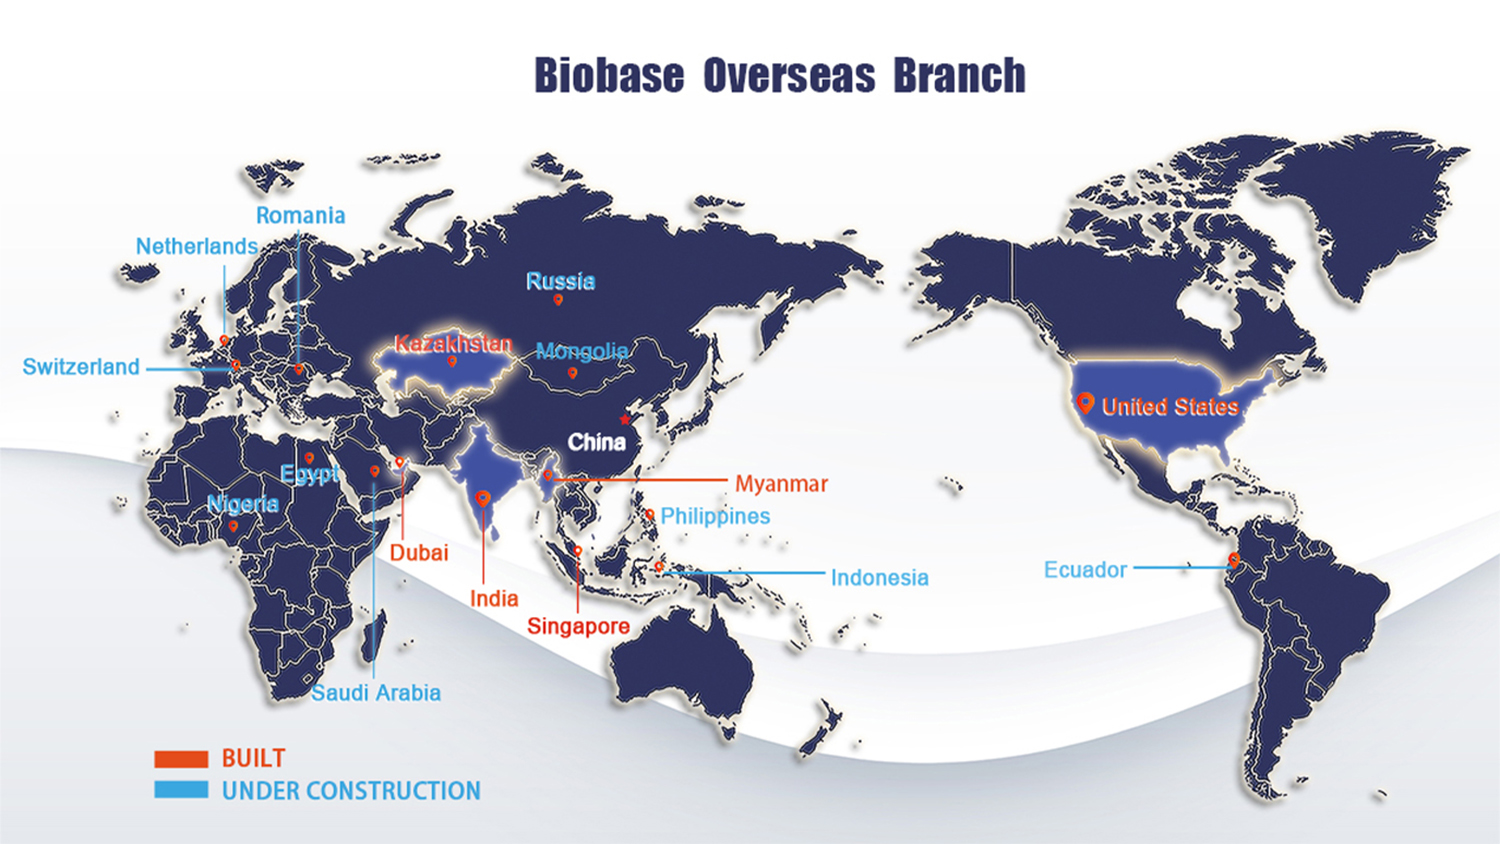 BIOBASE's winning bid products are shipped to Africa